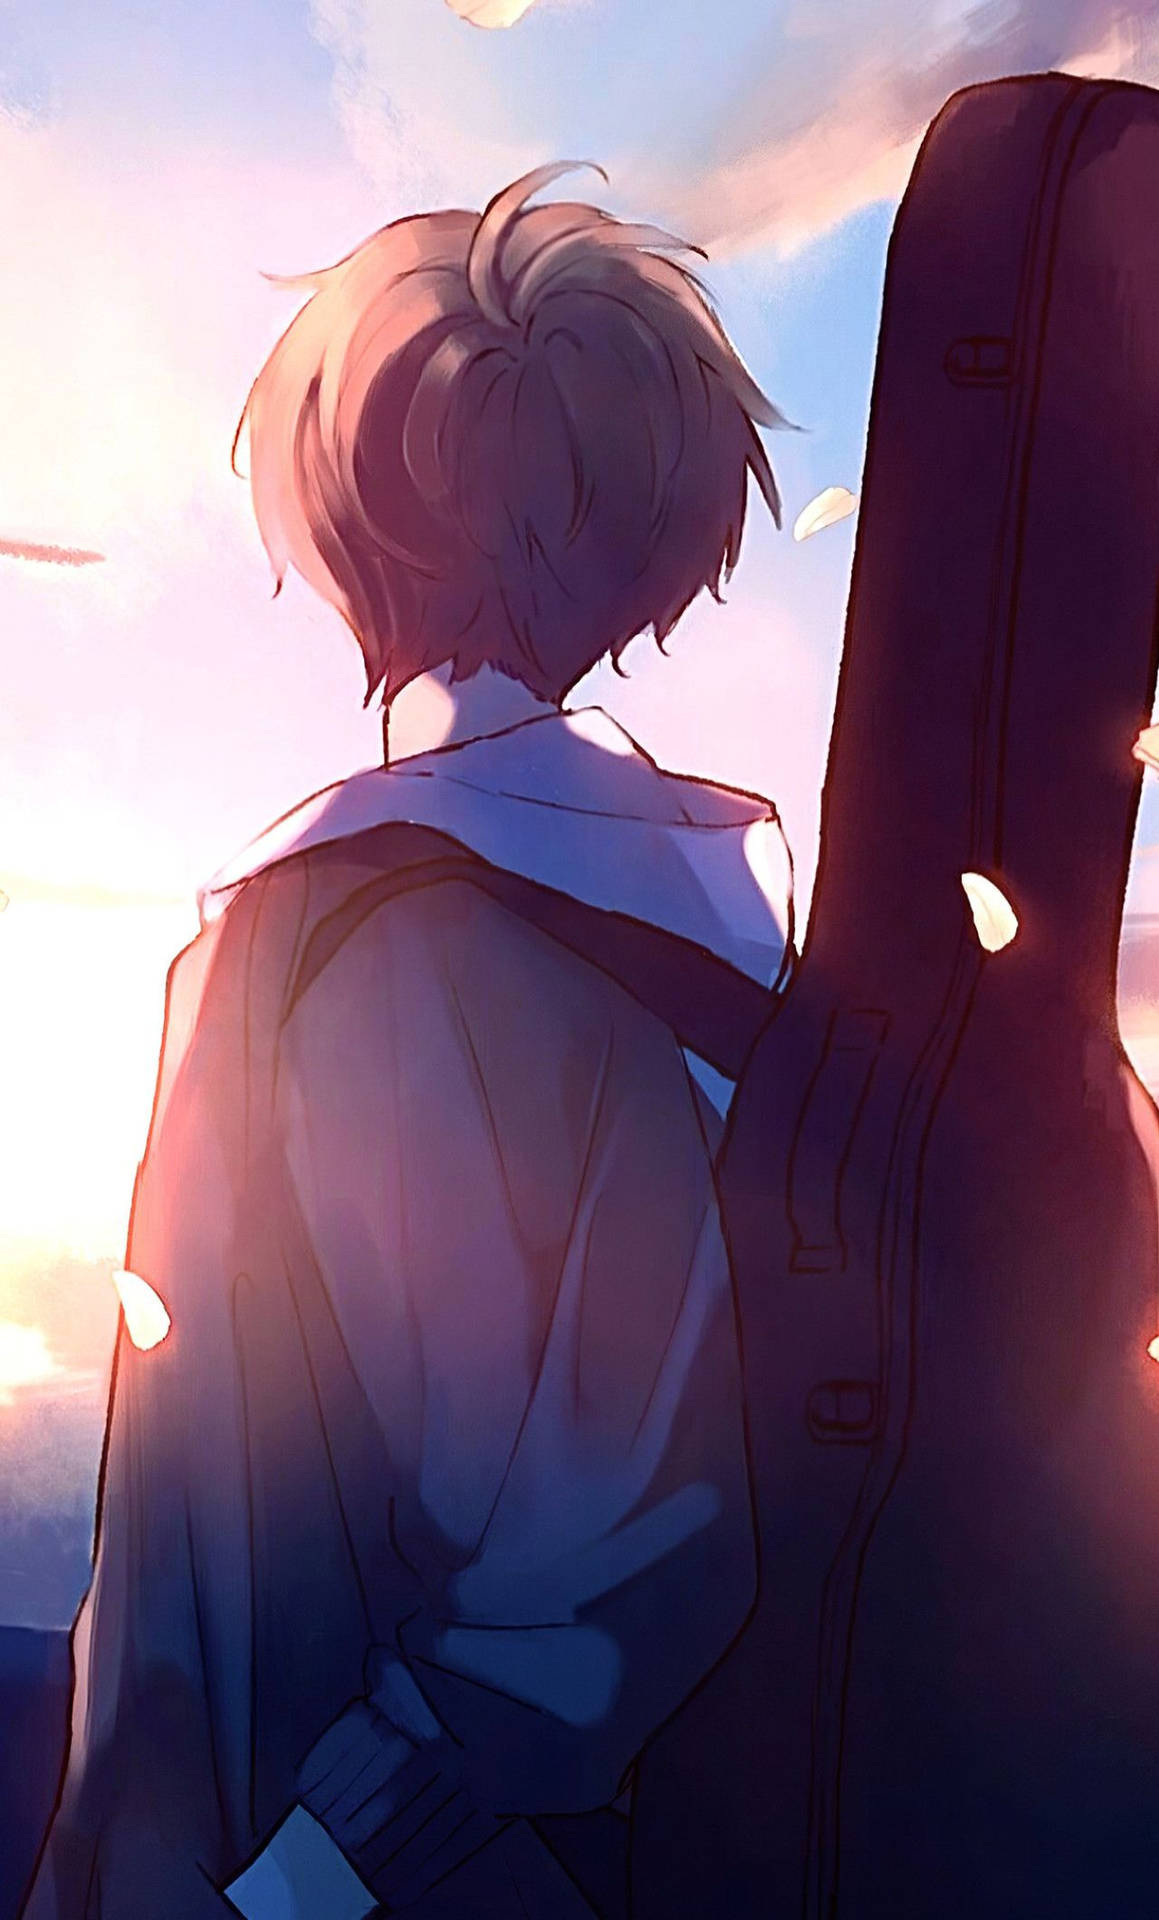 4k Phone Background Anime Boy With Guitar Case Wallpaper